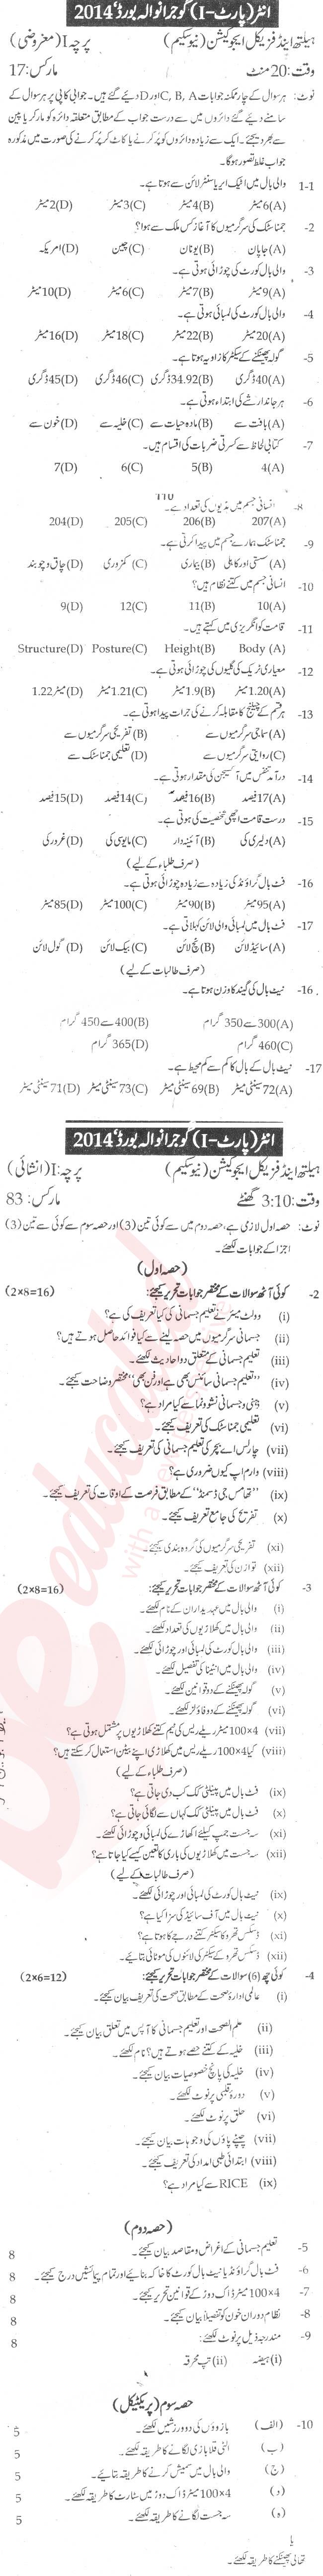 Health and Physical Education FA Part 1 Past Paper Group 1 BISE Gujranwala 2014